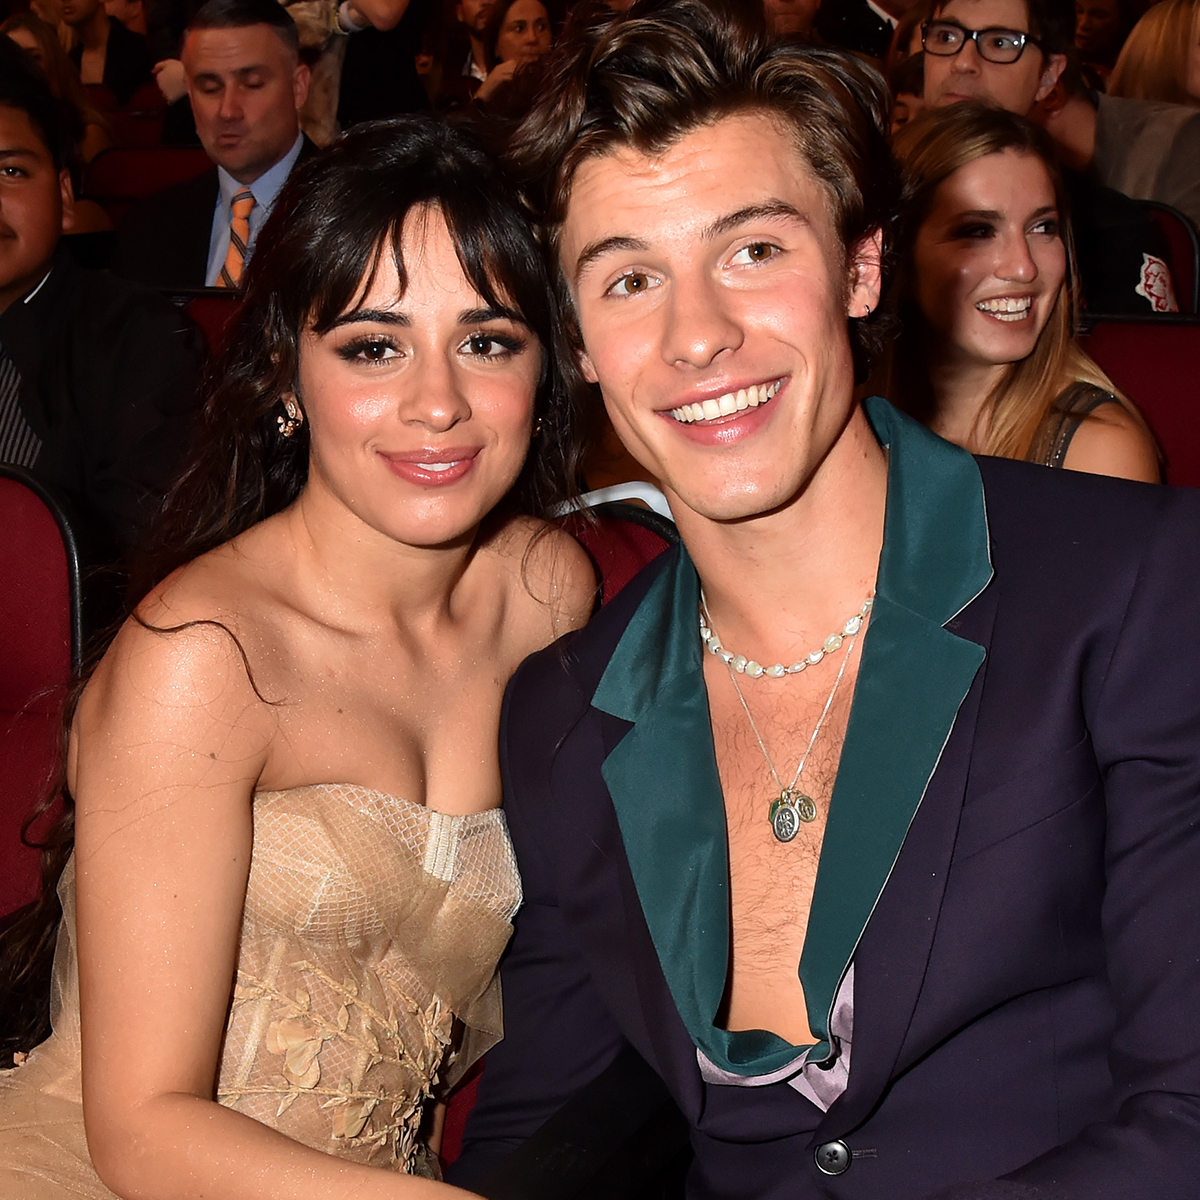 Camila Cabello Mistakes Voice Contestant for Ex Shawn Mendes